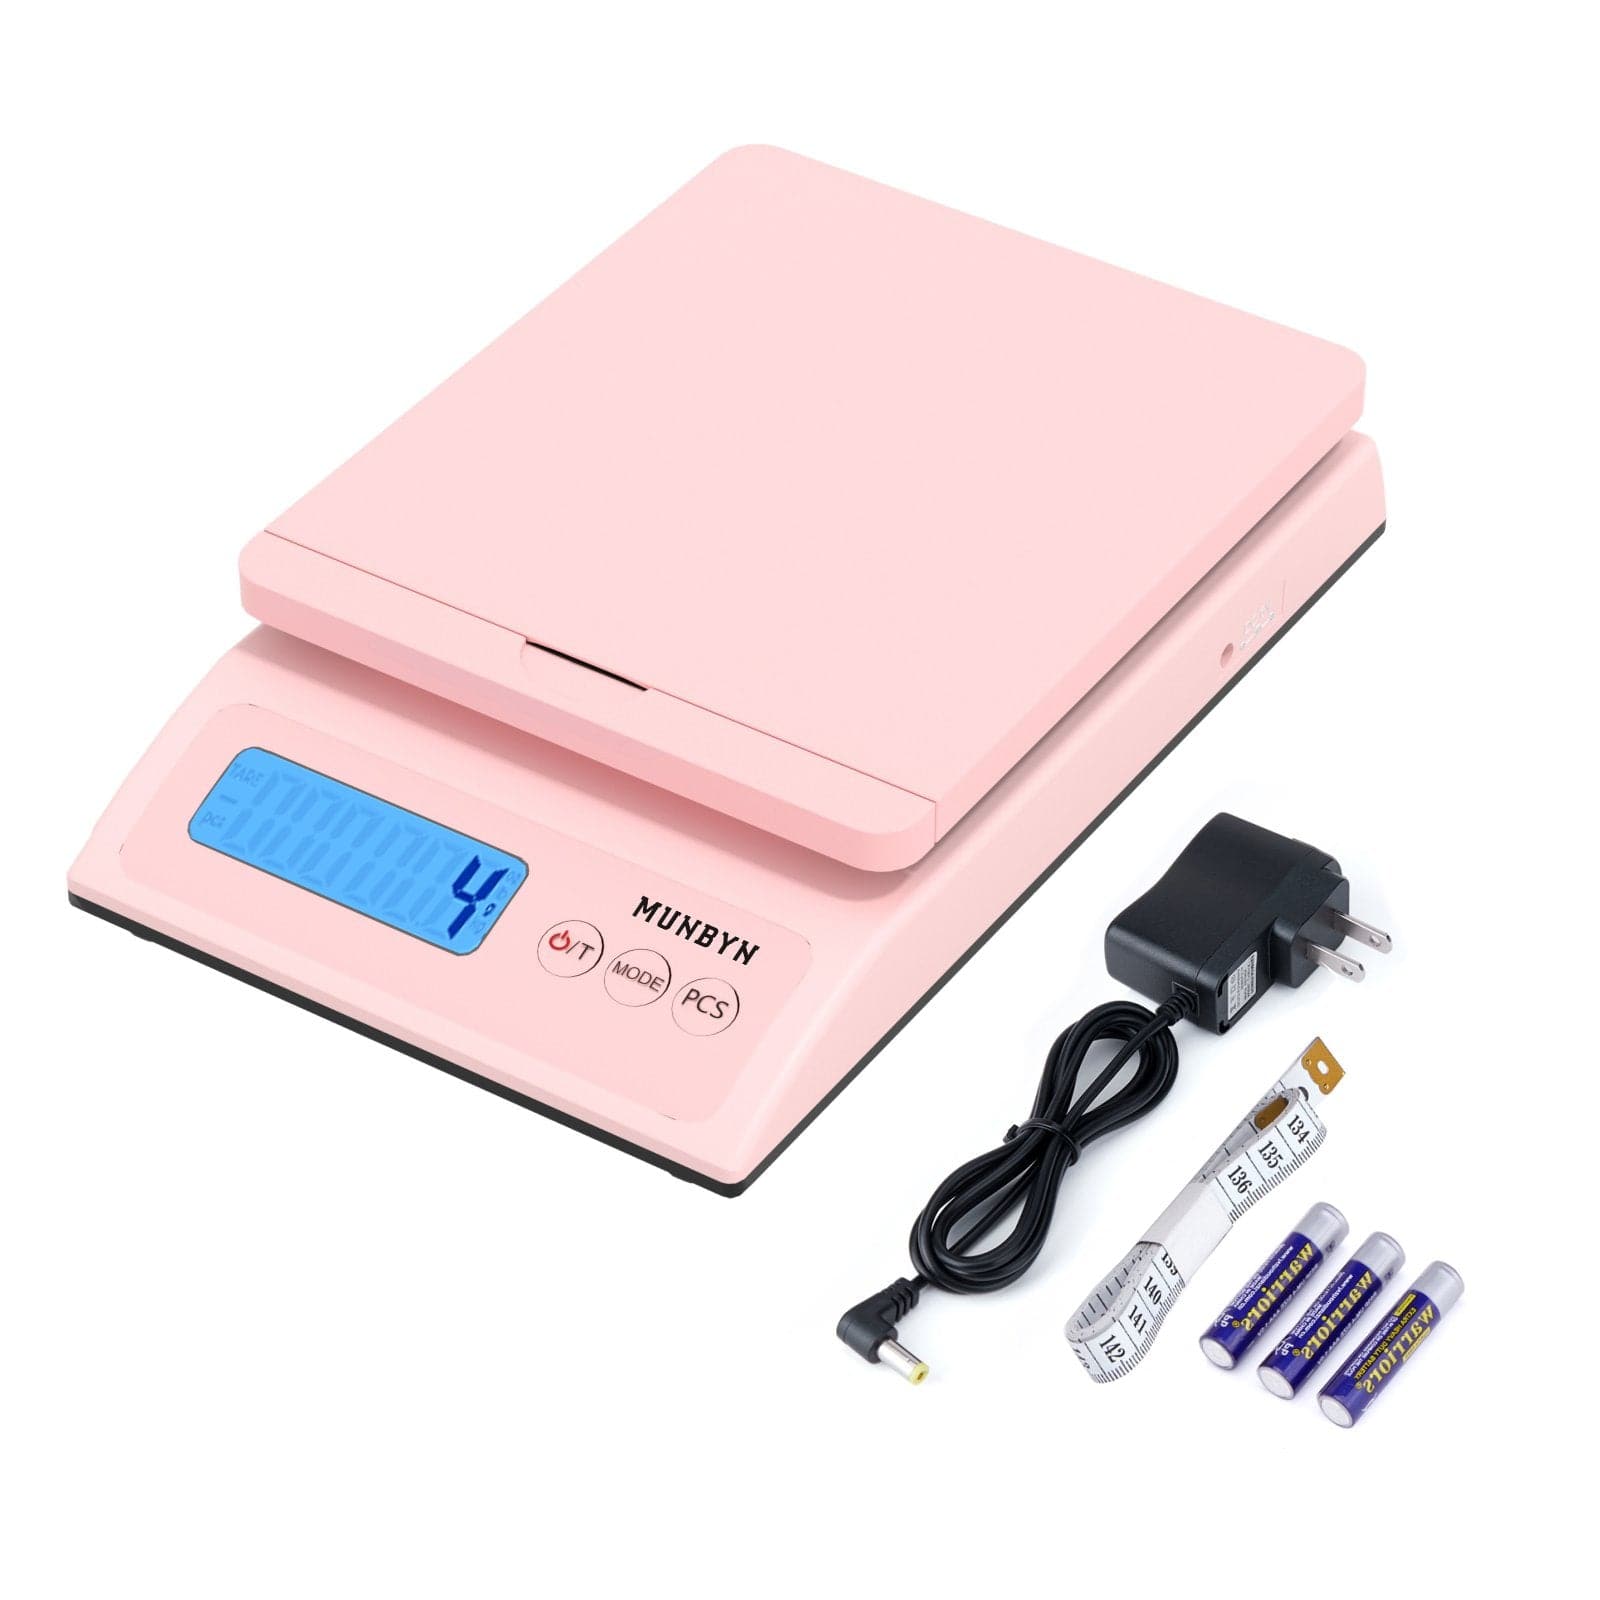 MUNBYN's pink digital postal scale comes with a charging head, three batteries, and a tape measure.